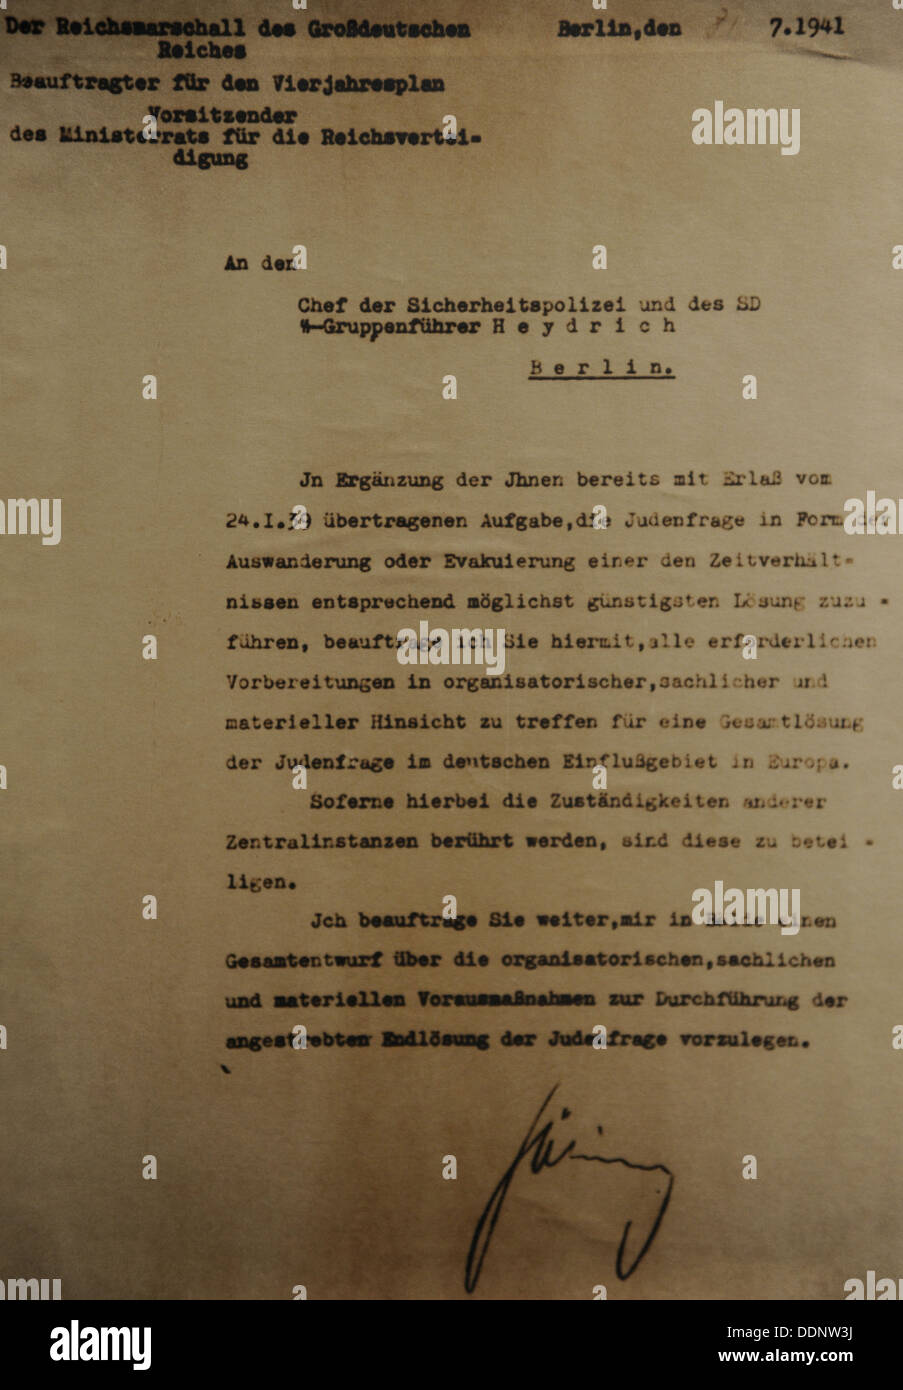 Nazi Document. Order of Hermann Göring on measures needed for the final solution of the Jewish question. Berlin, July 31, 1941. Stock Photo